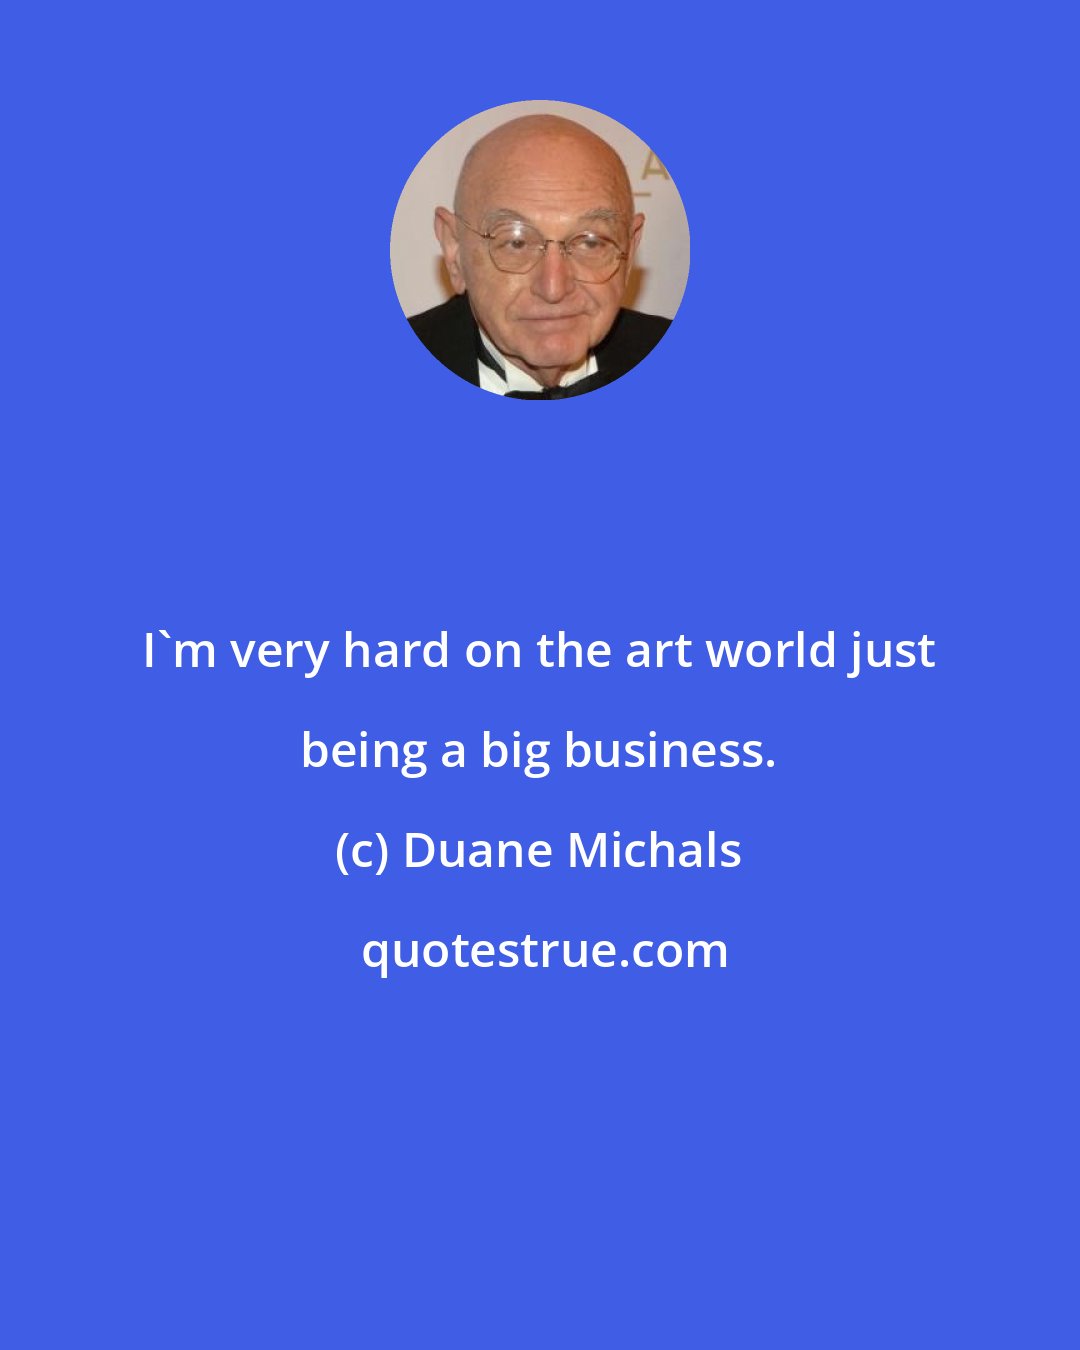 Duane Michals: I'm very hard on the art world just being a big business.